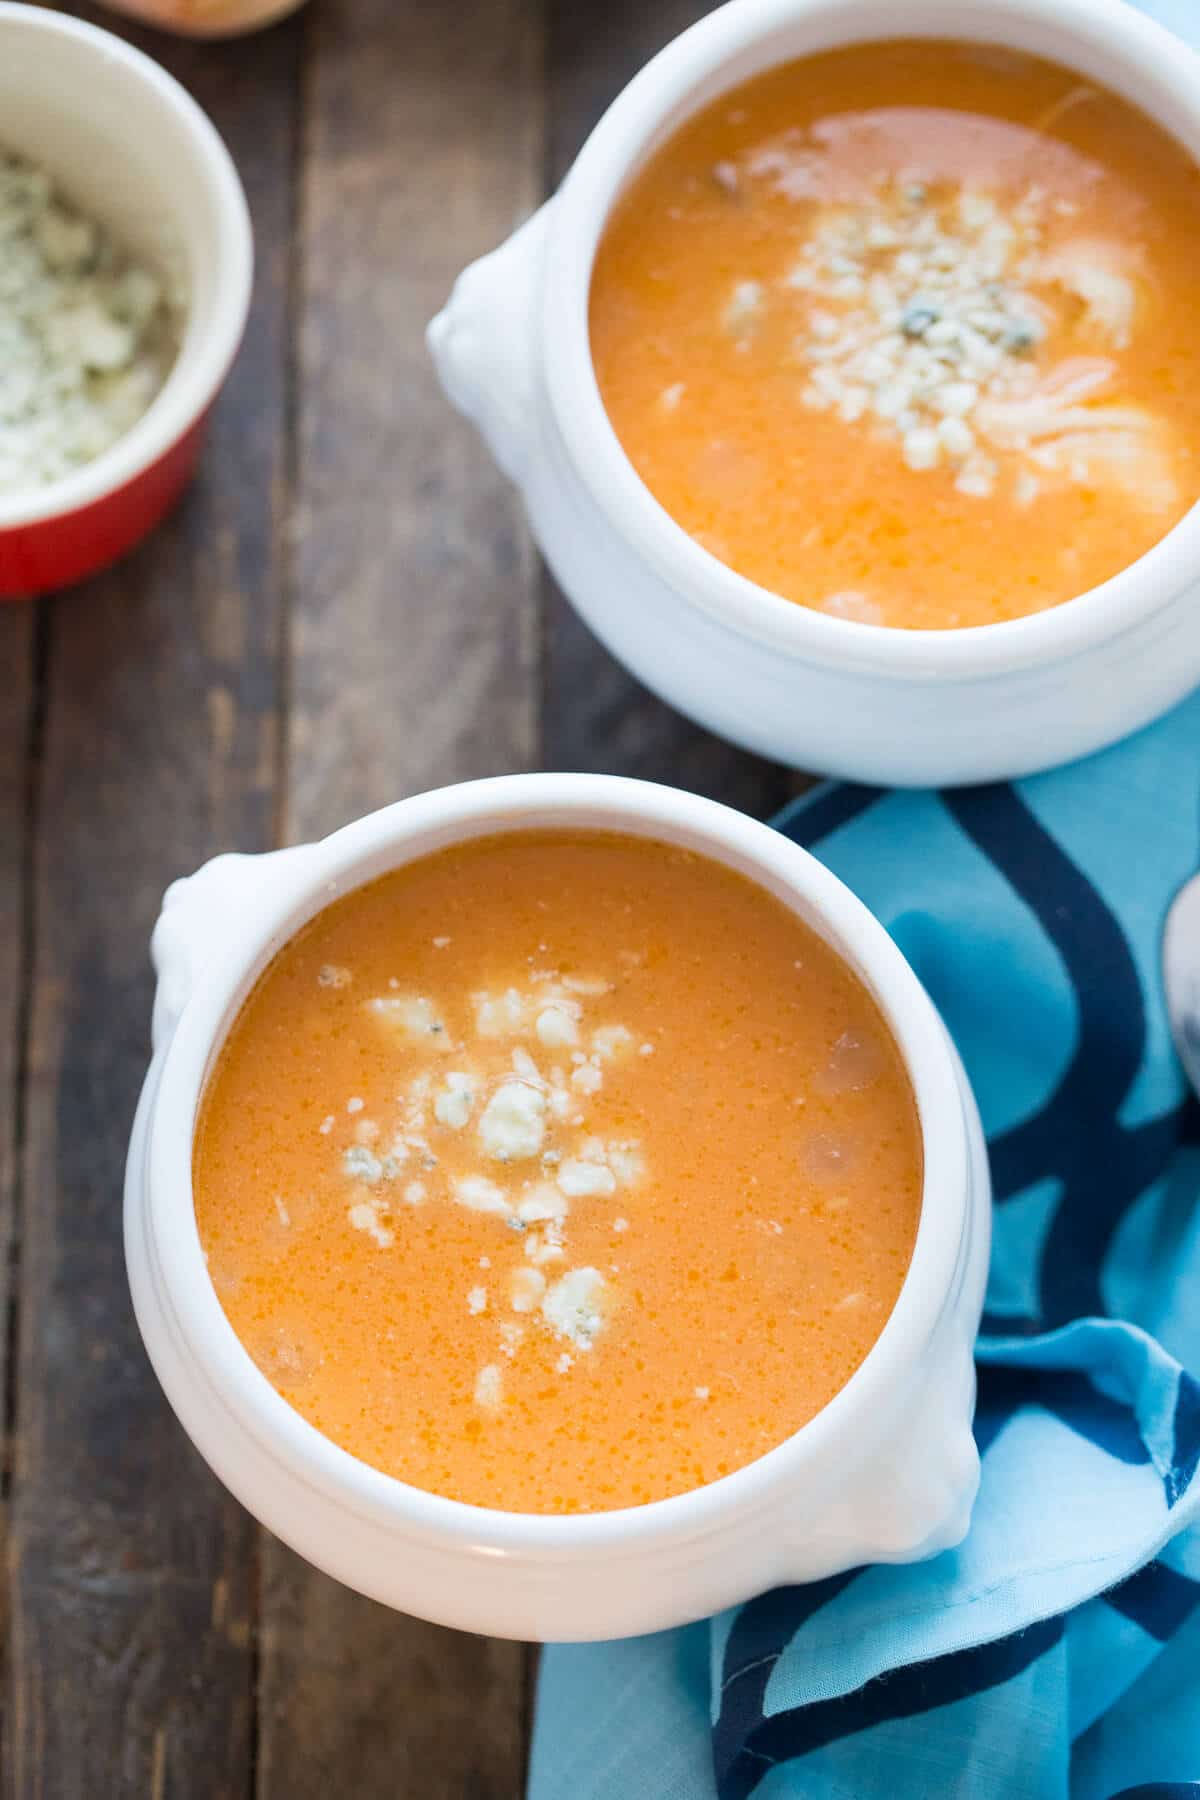 This Buffalo chicken soup is just what you need on a cold day! That little bit of heat will warm you up!